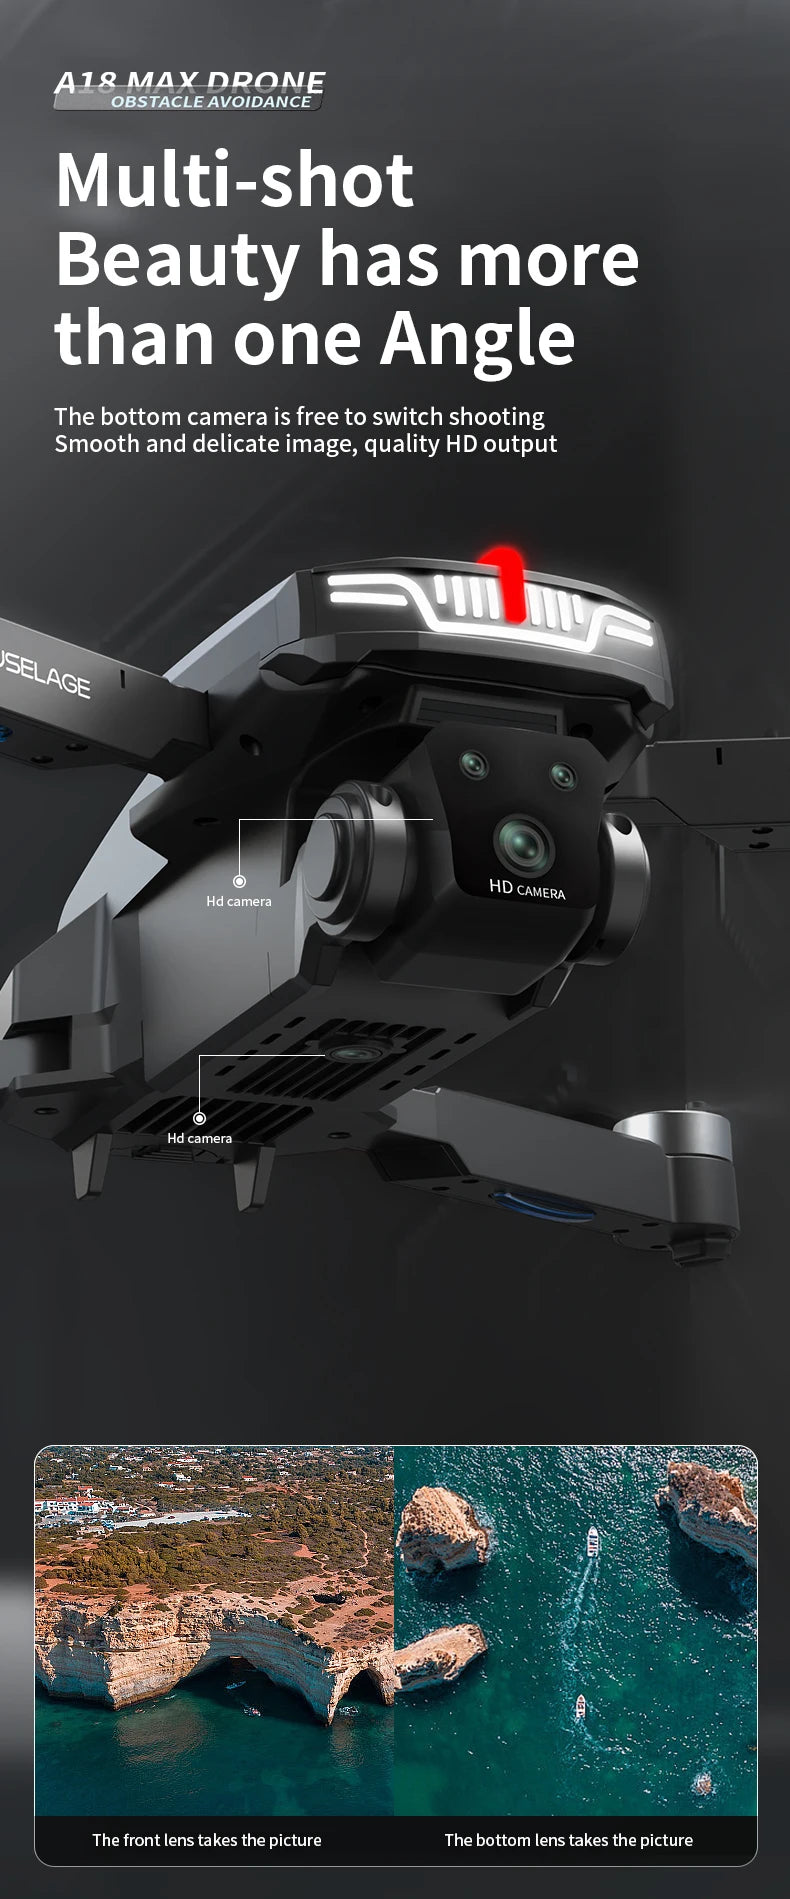 A18 MAX Drone, a1& maxdrone obstacle avoidance multi-shot beauty